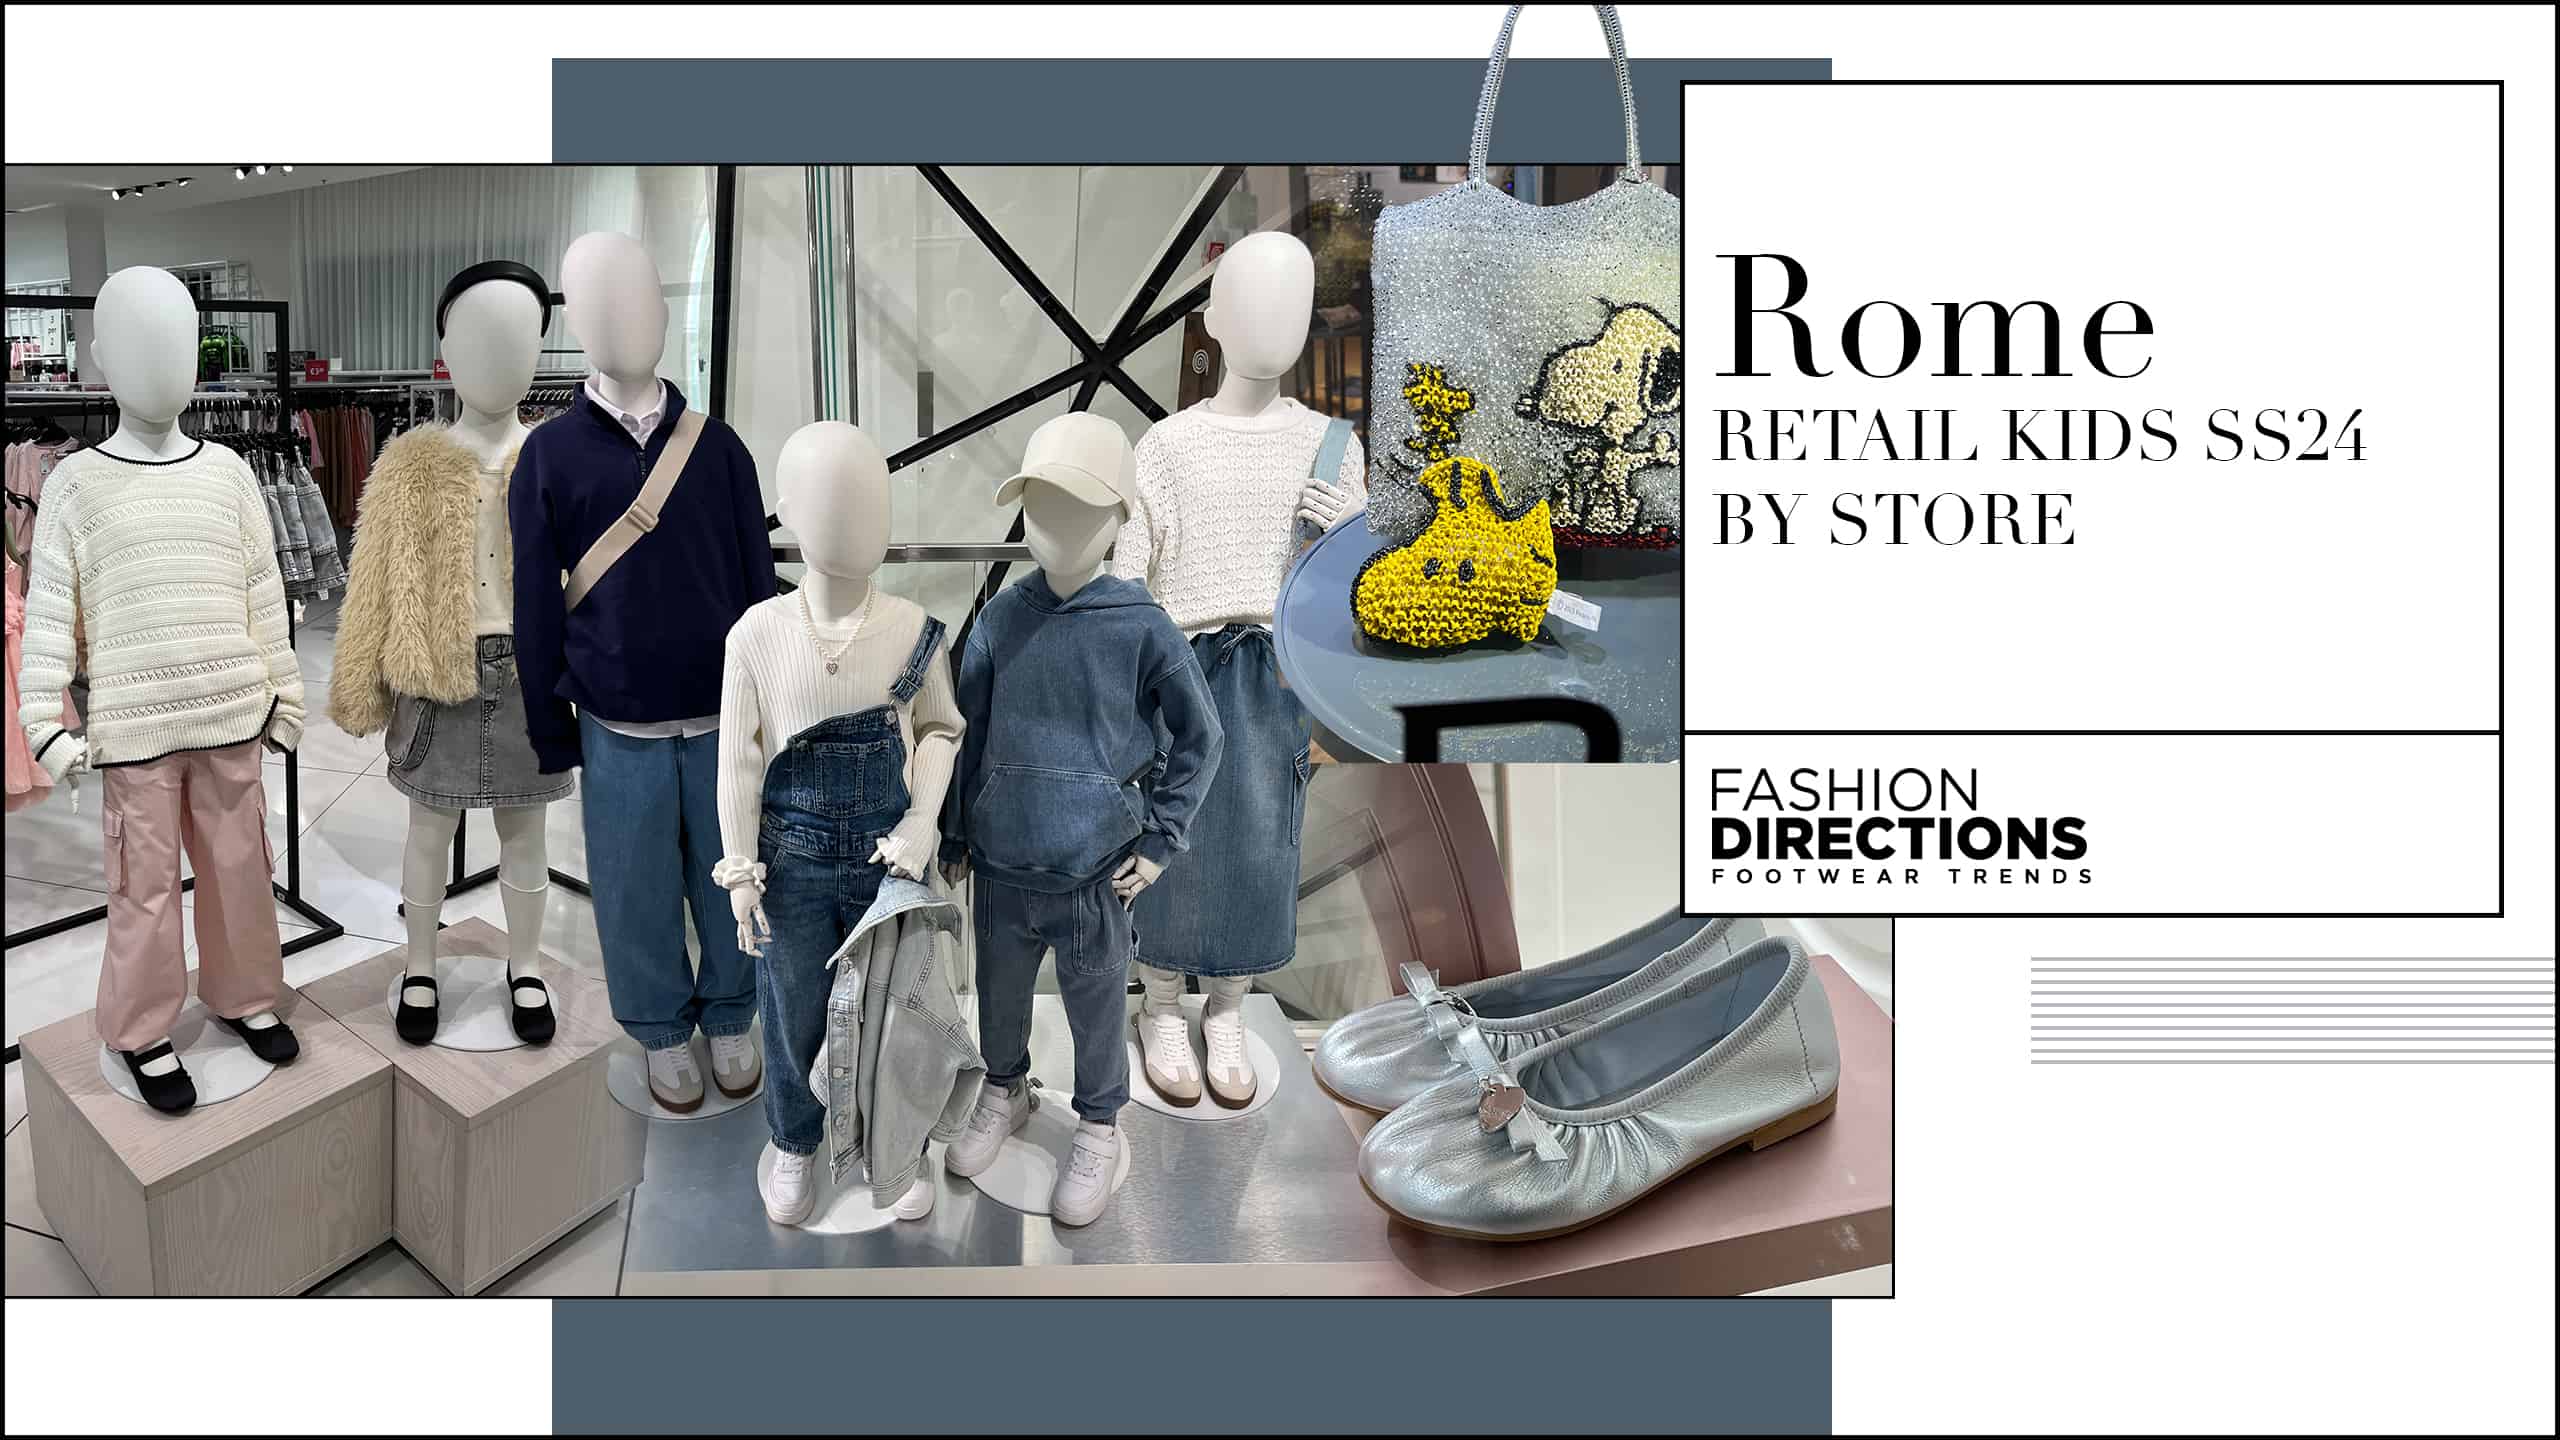 Rome Retail Kids ss24 By Store